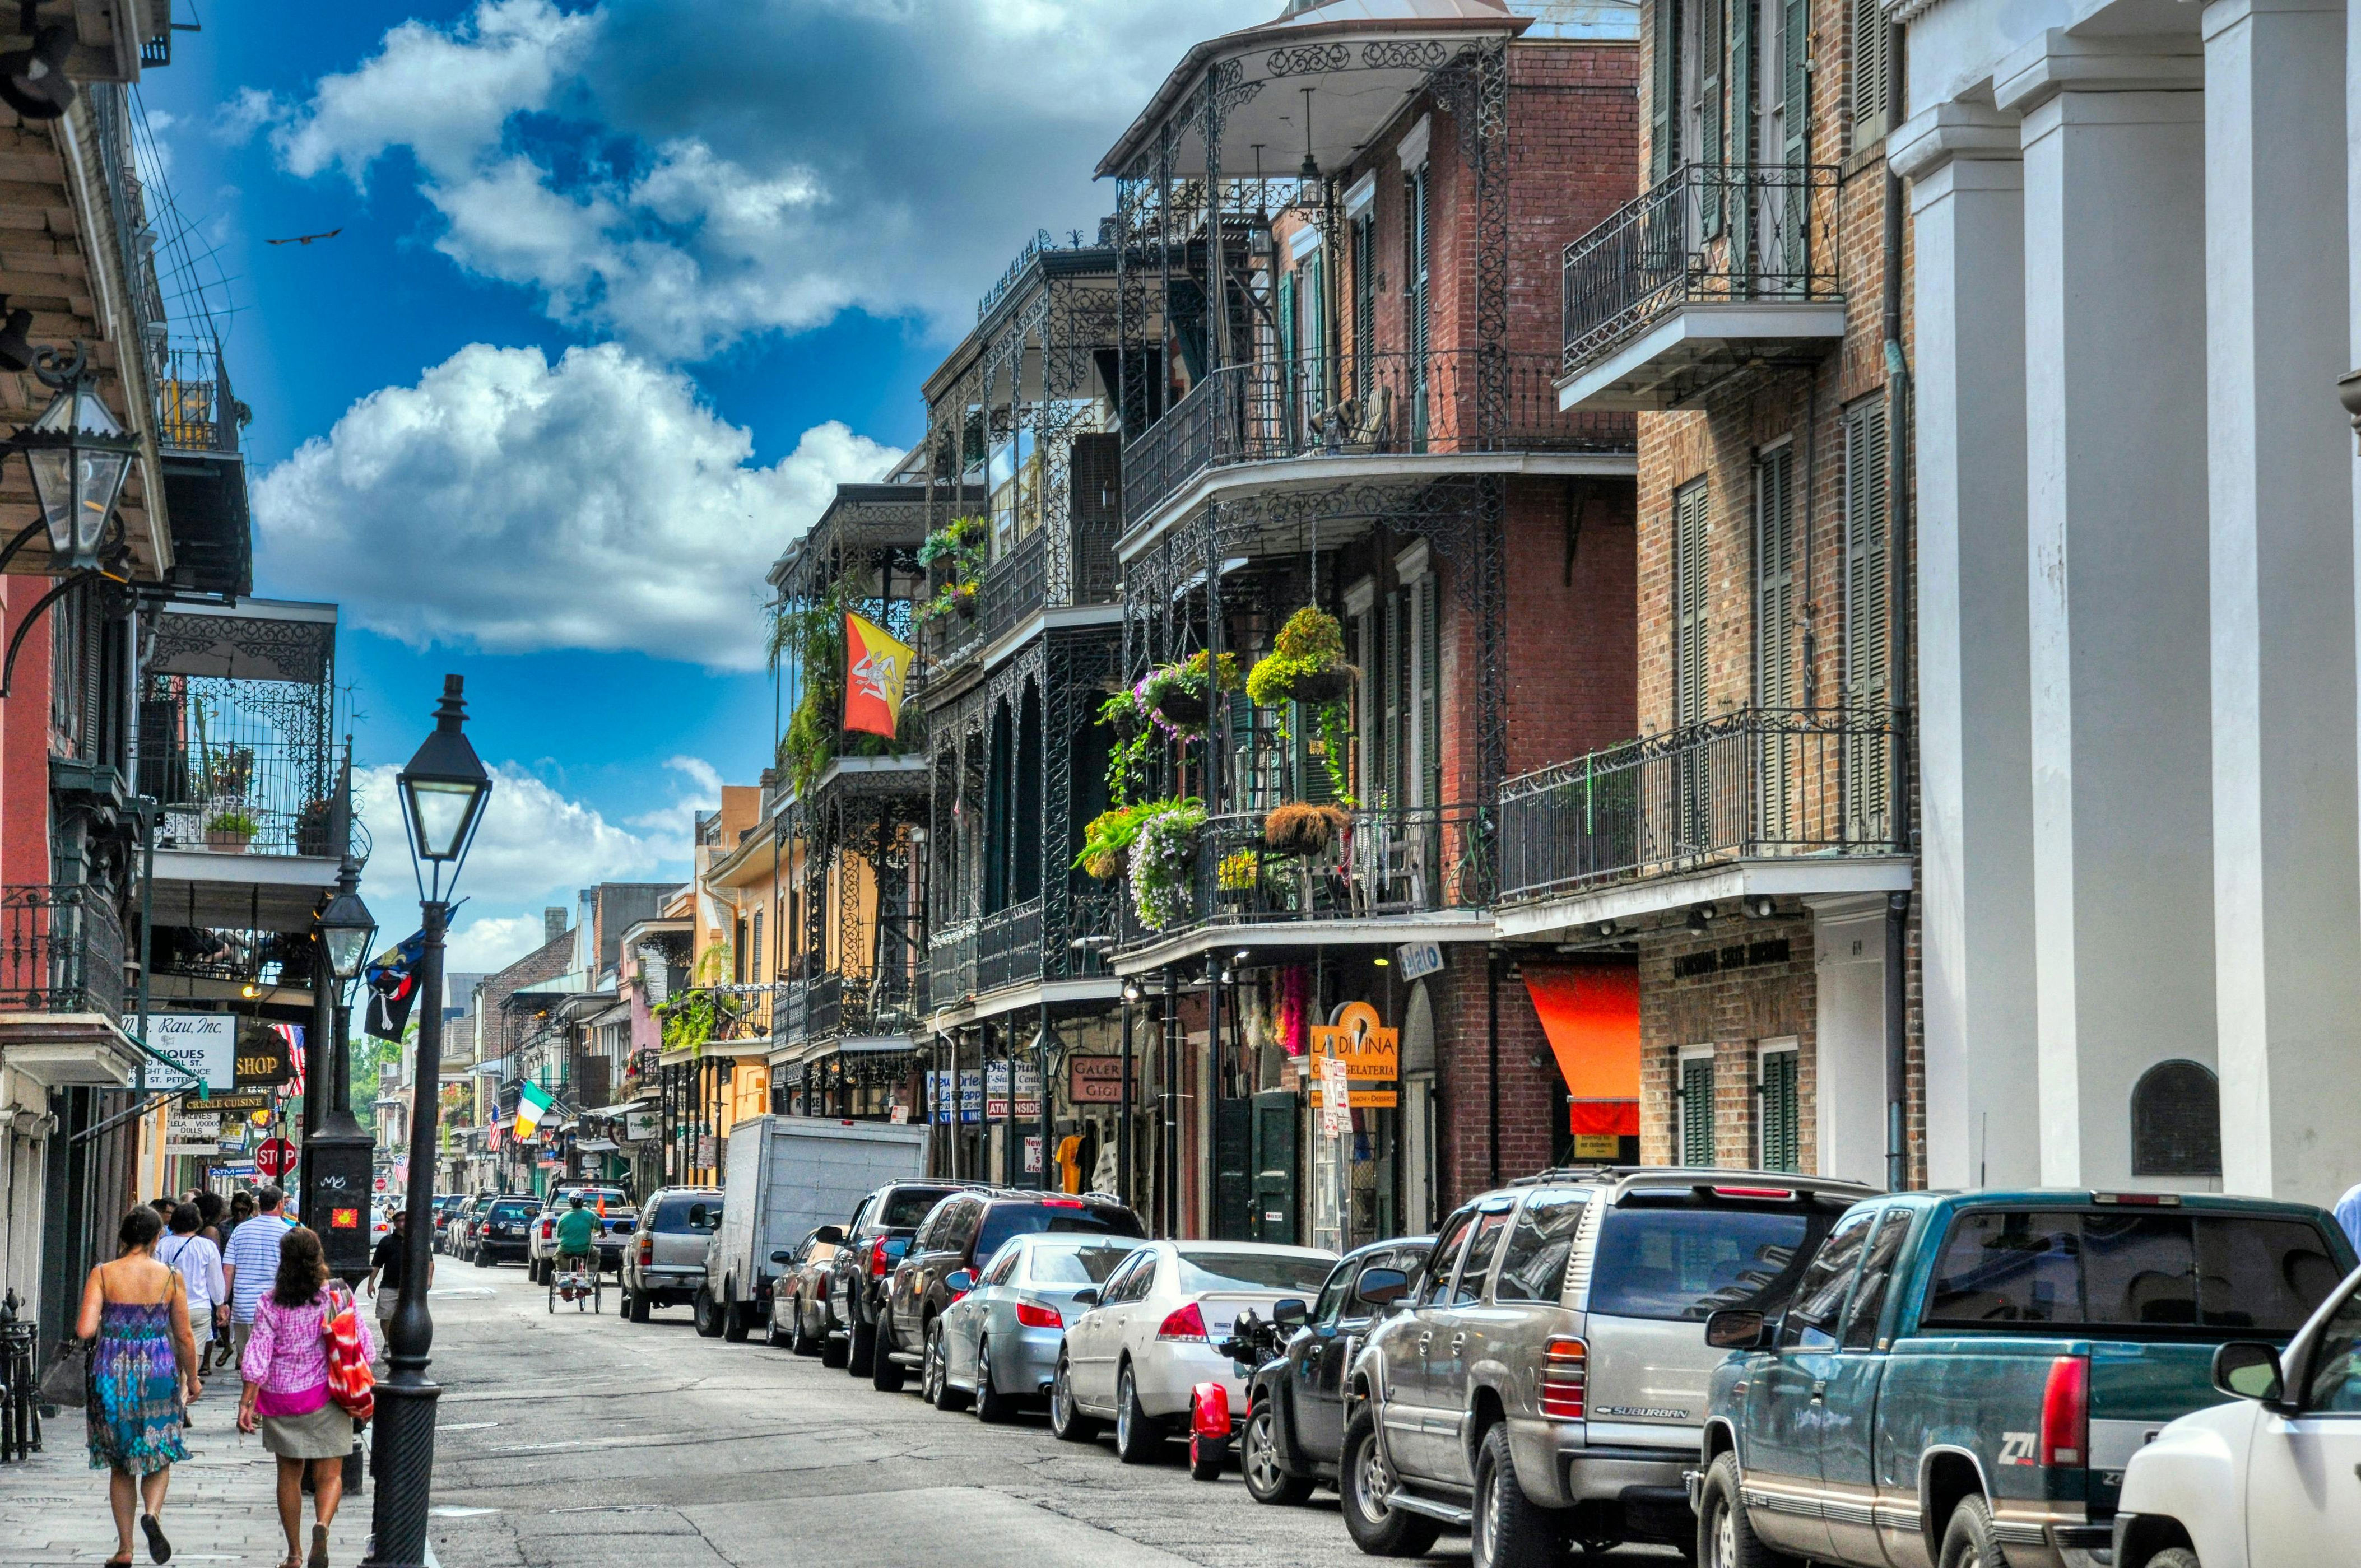 <h3>New Orleans, Louisiana</h3><p>It's an understatement to say that New Orleans is festive. While we all know about <strong><a href="https://www.brit.co/mardi-gras-recipes/">Mardi Gras</a></strong>, it's safe to say there's something fun going on all year round. Our favorite area to explore is the famed French Quarter, but we recommend booking a hotel in the slightly tamer Garden District or a haunted property elsewhere in town. Luckily, NOLA is highly walkable and Ubers are readily available, which makes it so much easier to see it all. Get spooked on a ghost tour with <strong><a href="https://freetoursbyfoot.com/ghost-tour-new-orleans/">Free Tours by Foot</a></strong> (they offer a variety of other, non-occult tours too!). Dance the night away on Frenchman Street, where the best <strong><a href="https://www.brit.co/jazz-playlist/">jazz</a></strong> musicians in the city play.</p>